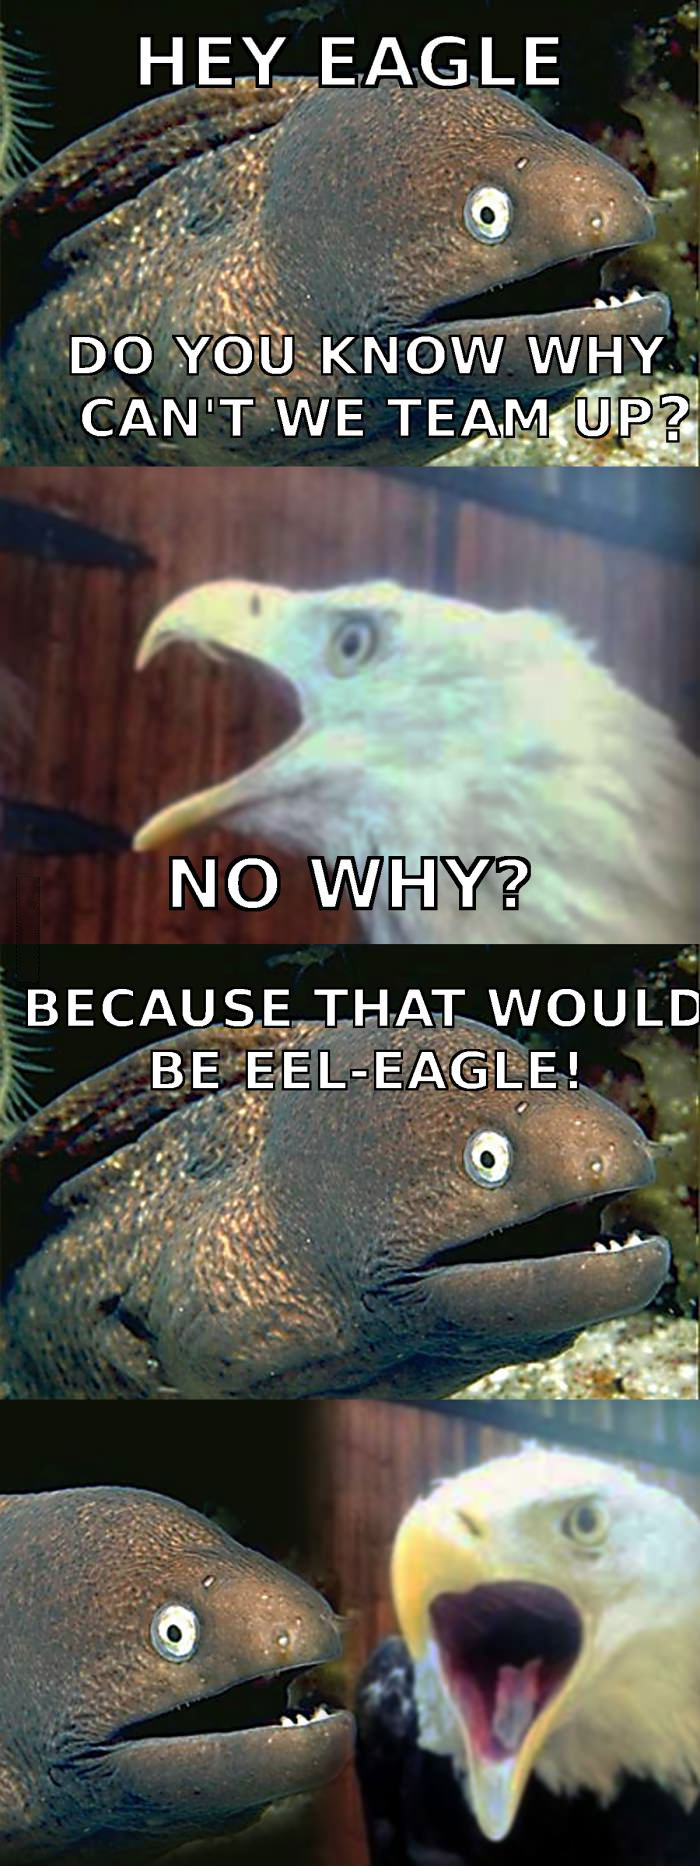 hey eagle do you know why we can't team up?, no why, because that would be eel-eagle, Why can't an eel and an eagle team up?, bad joke eel, meme